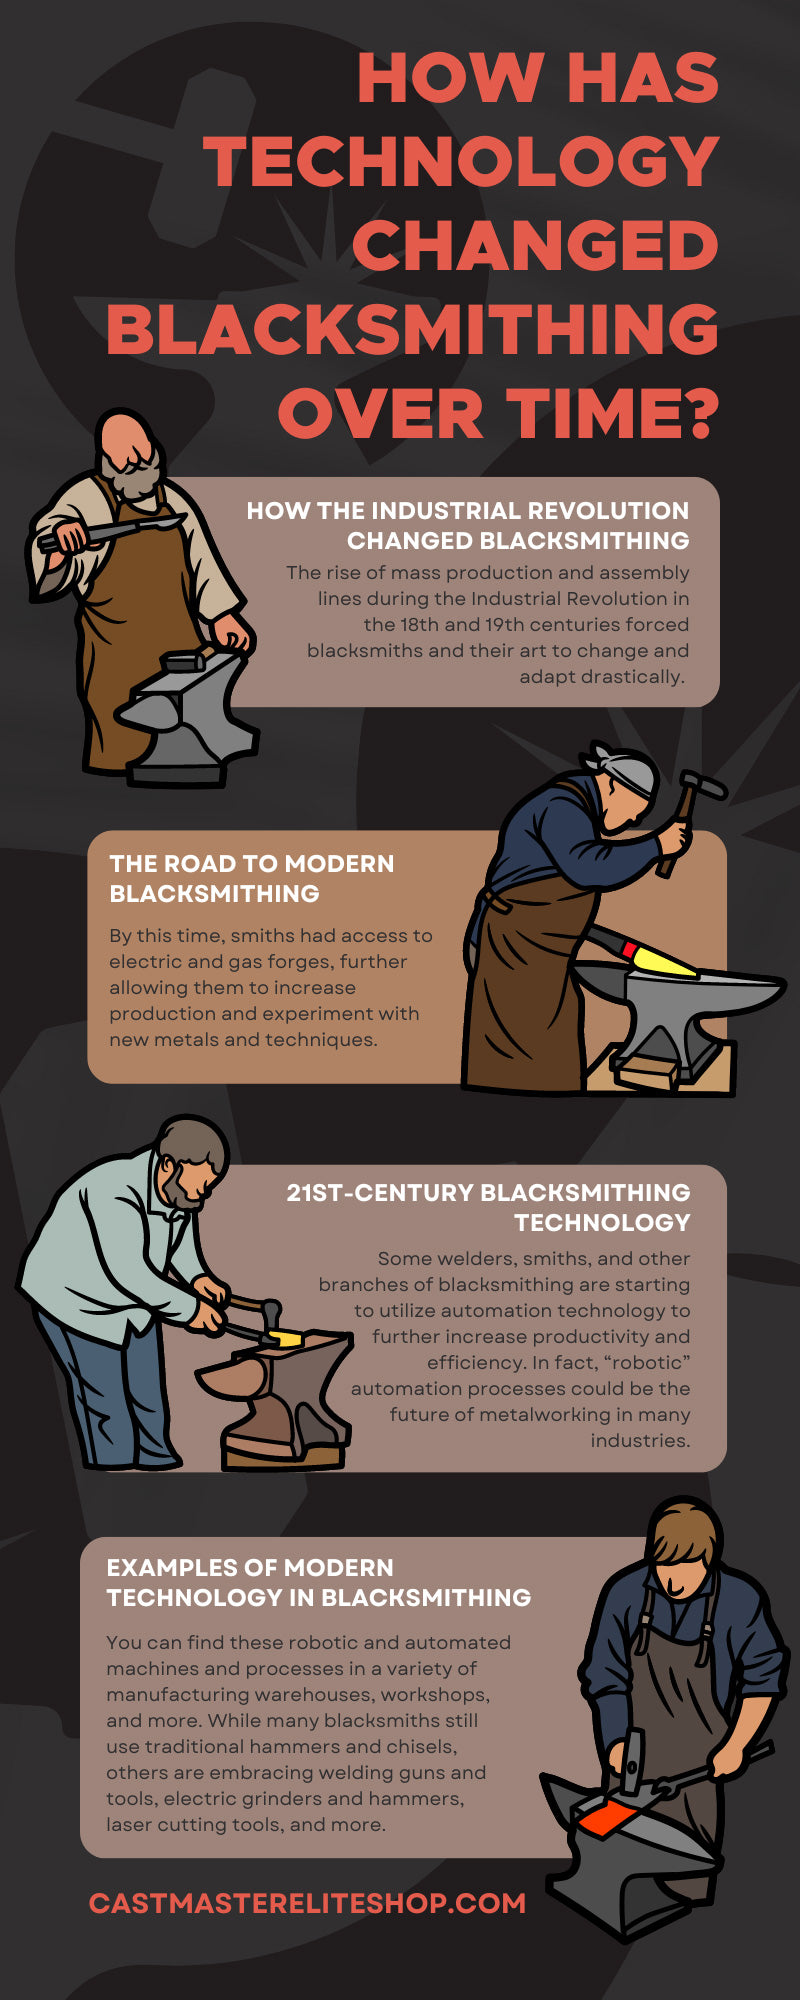 How Has Technology Changed Blacksmithing Over Time?